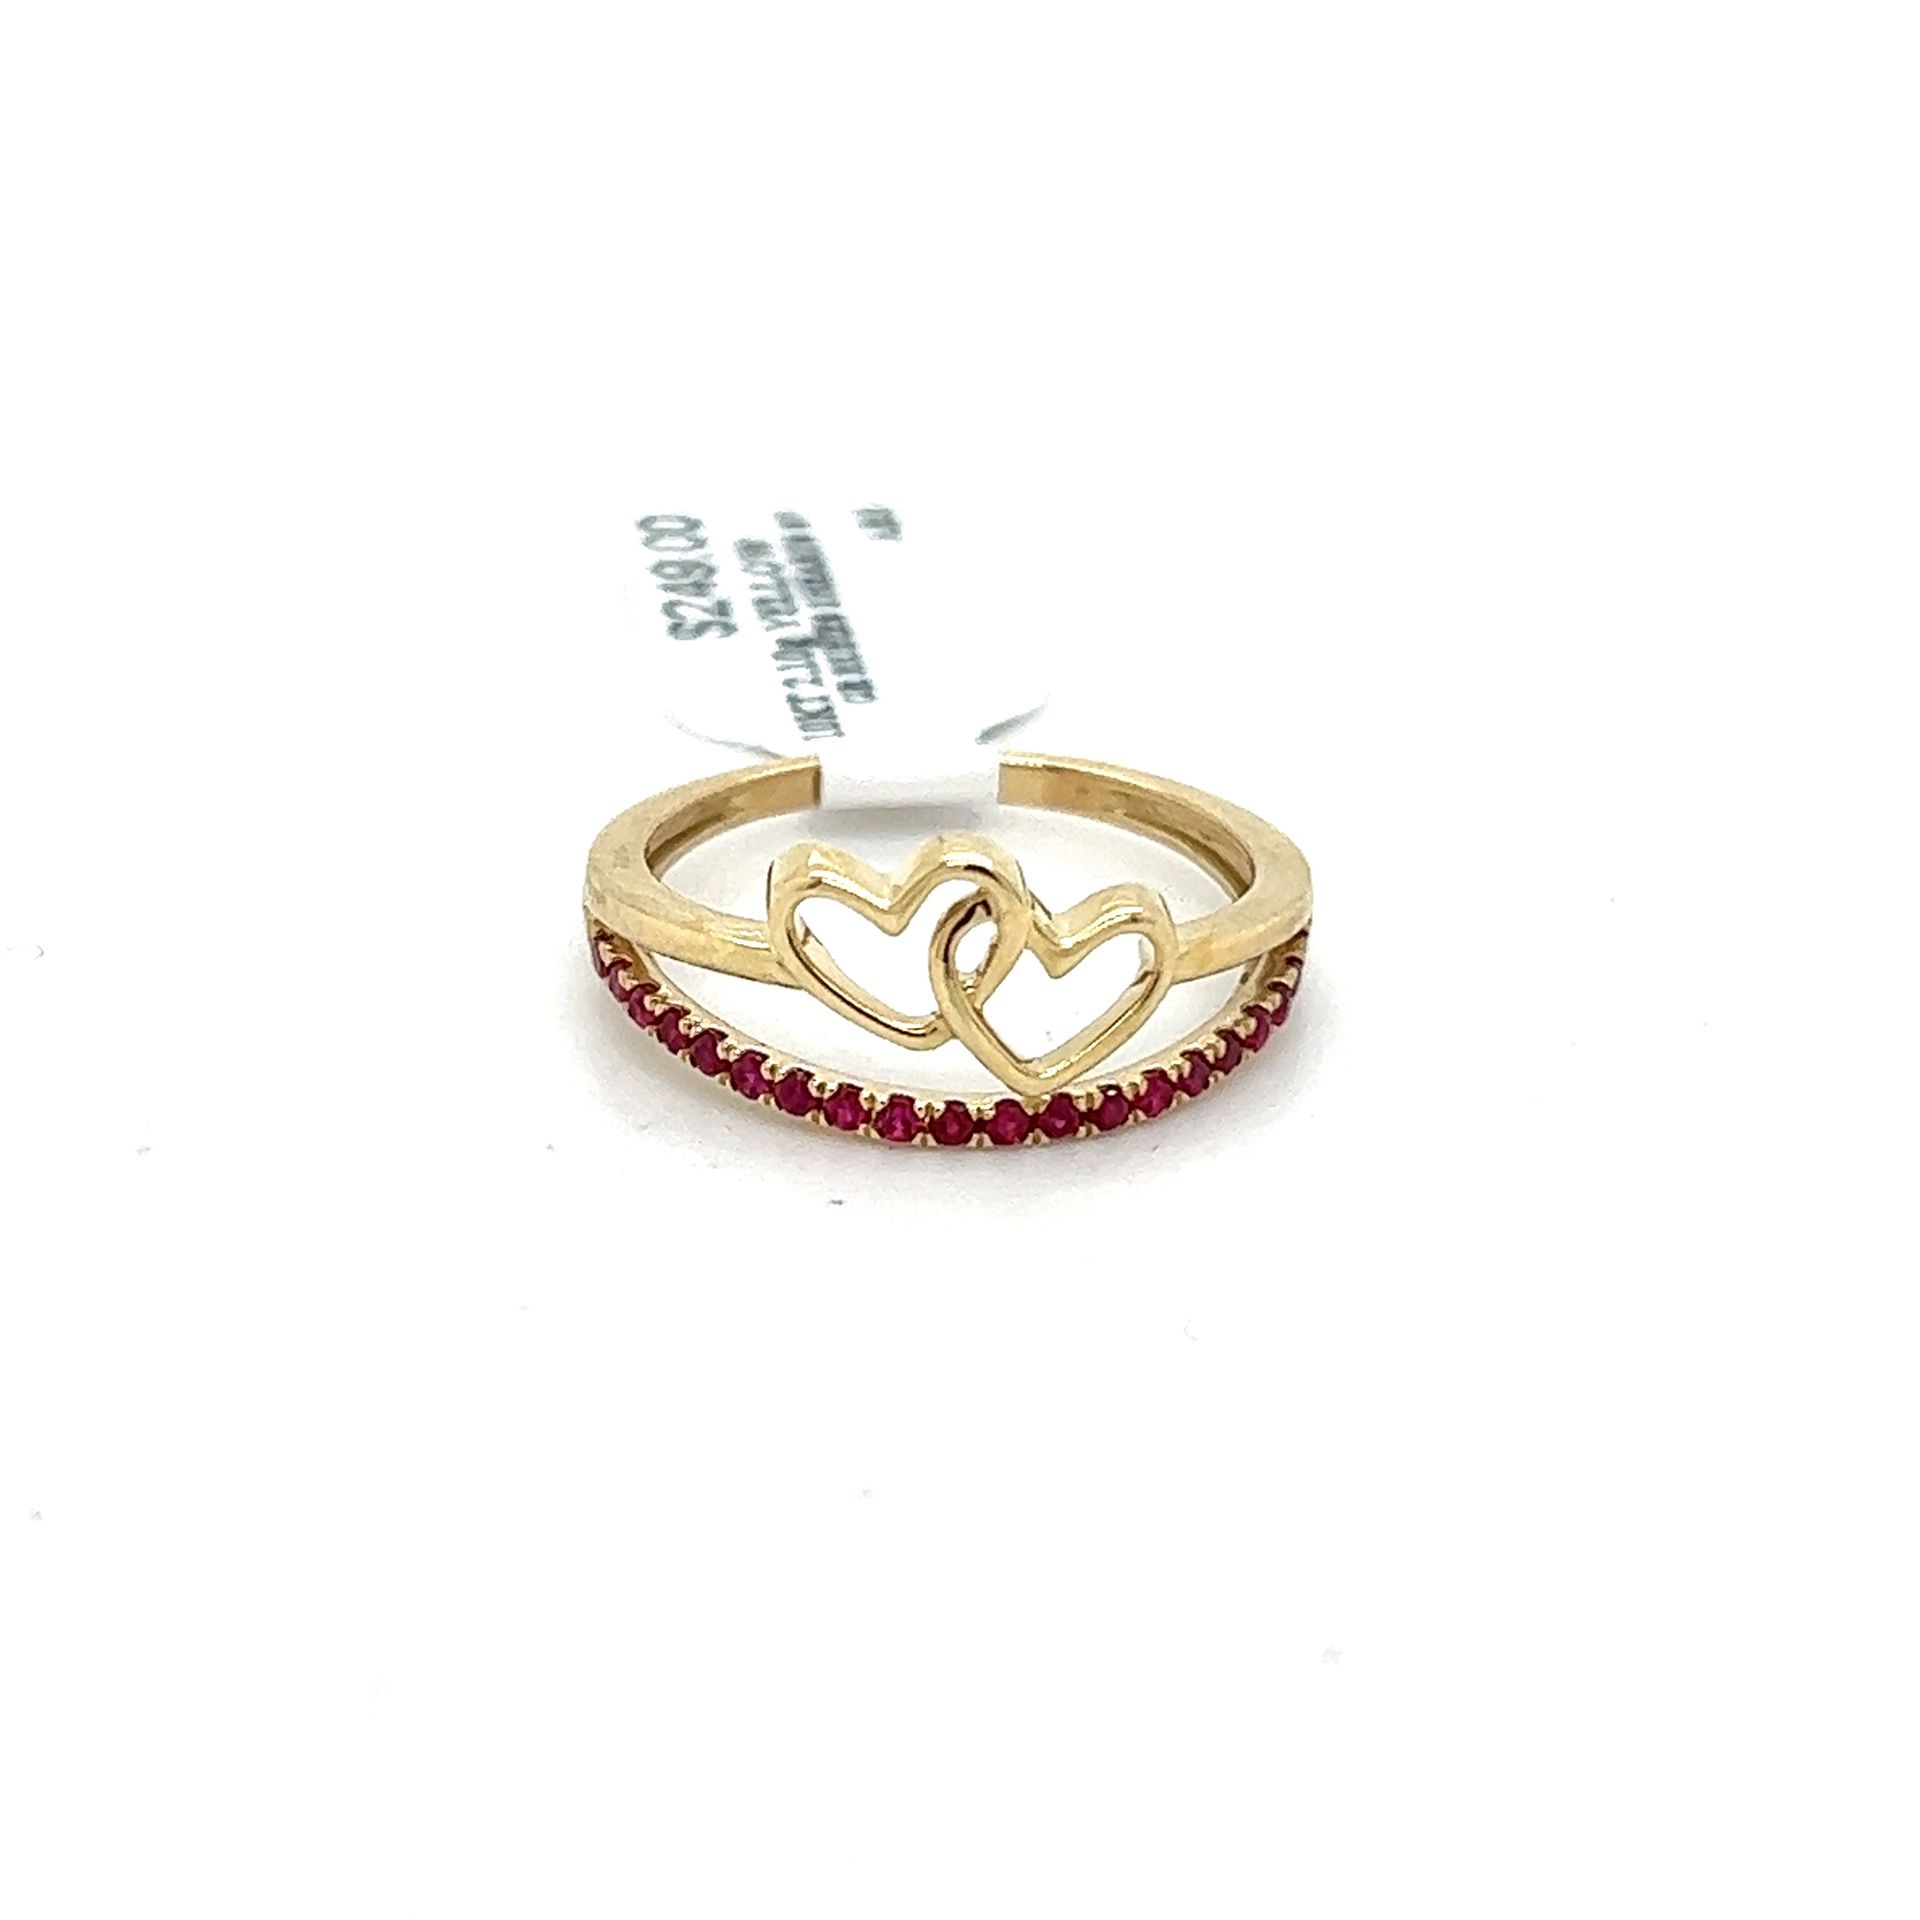 10kt Gold Gemstone Ring With Rubies 2 Hearts Size 7 2.10grams 164930 13